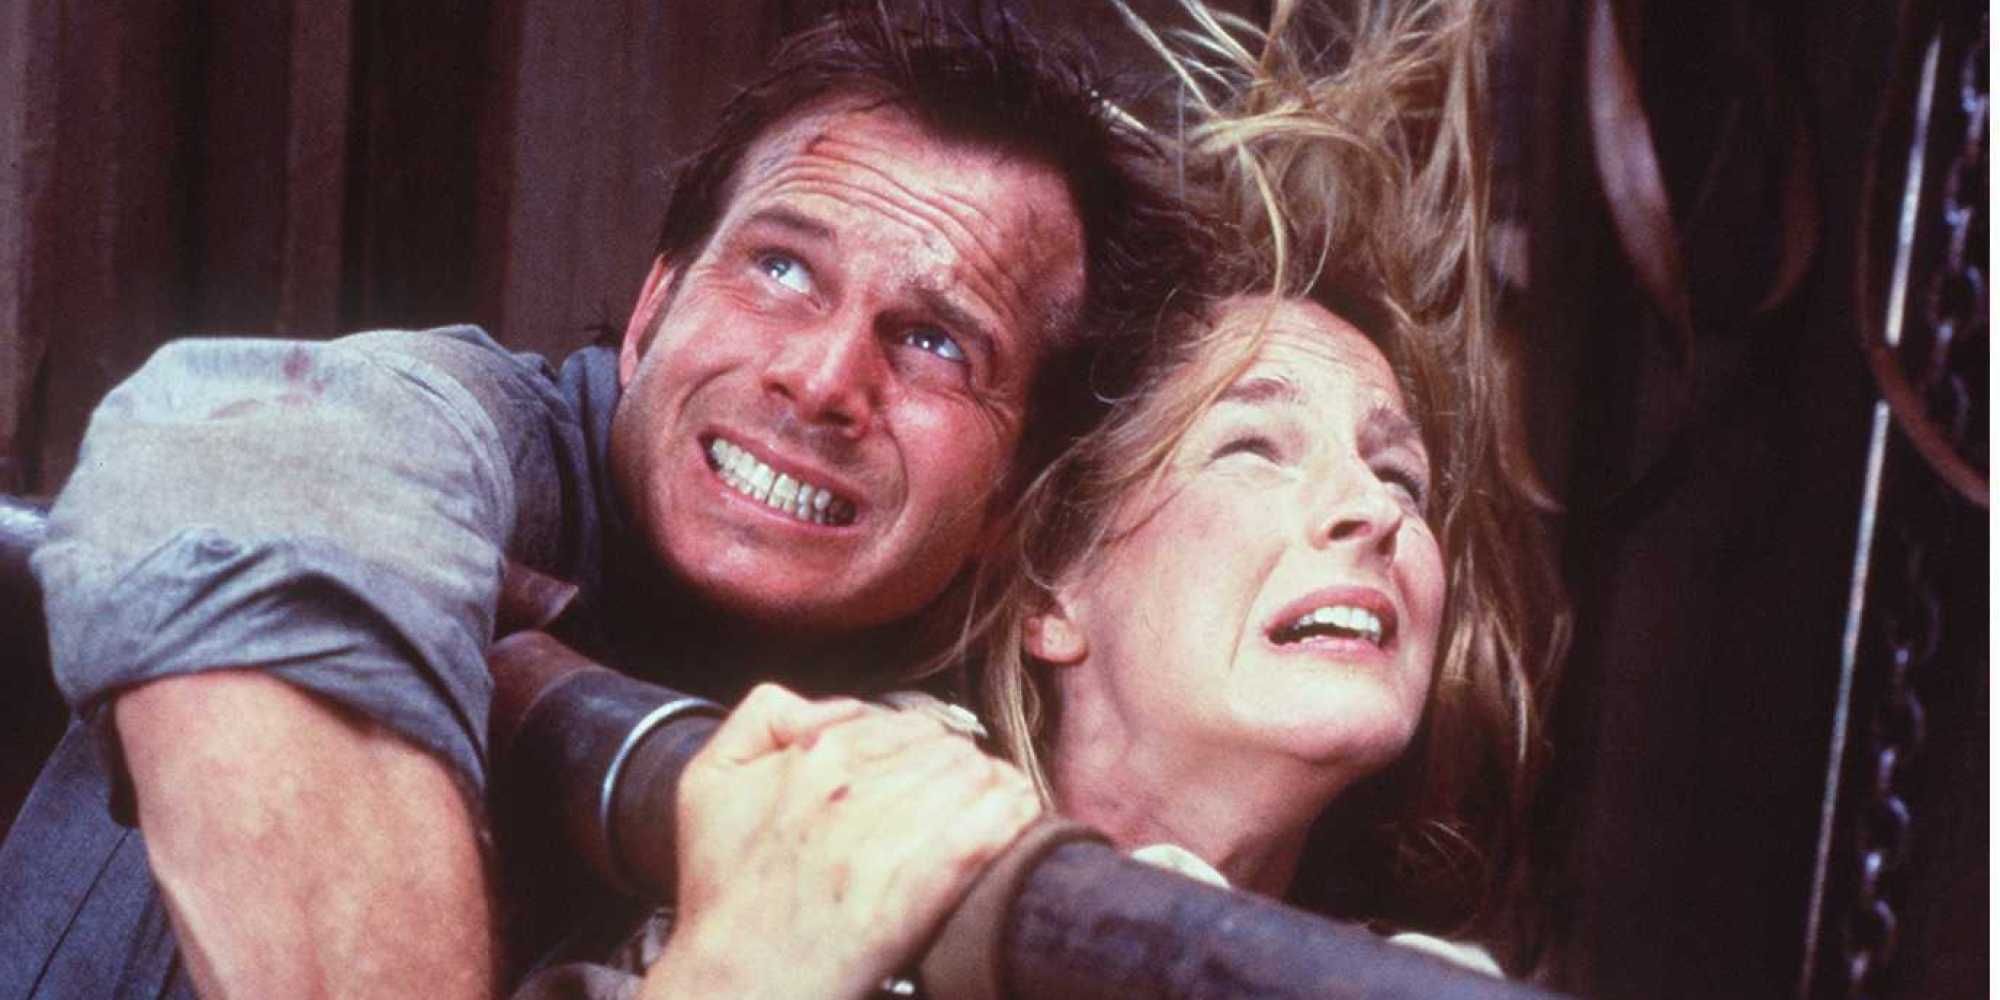 Bill Paxton and Helen Hunt in Twister